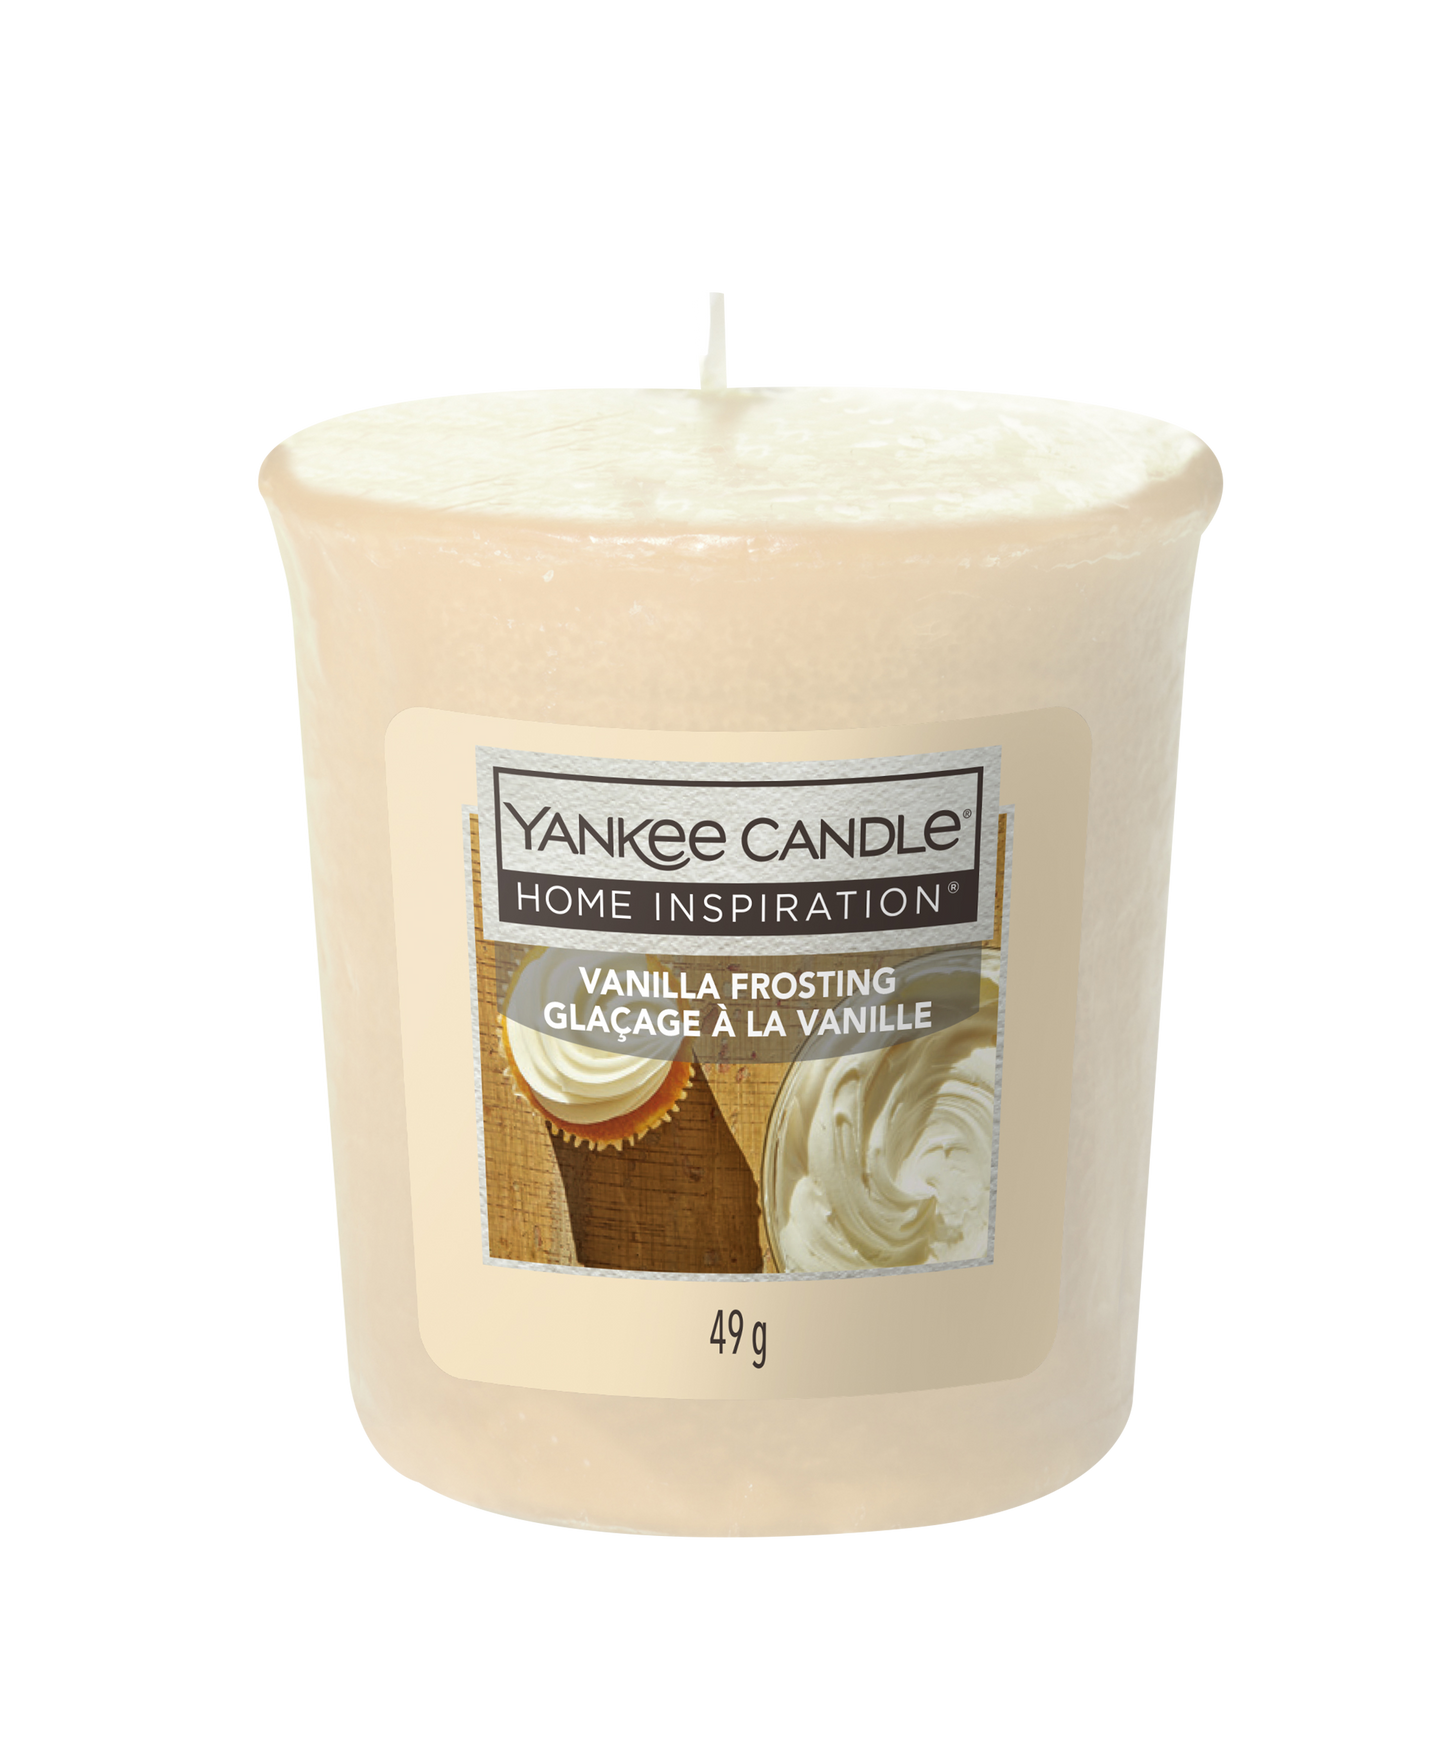 Vanilla Frosting Votive Surround yourself with the scent of creamy, sugary confections with this Yankee Candle® Home Inspiration® fragrance. This candle provides top notes of confectionary sugar and milky accord.